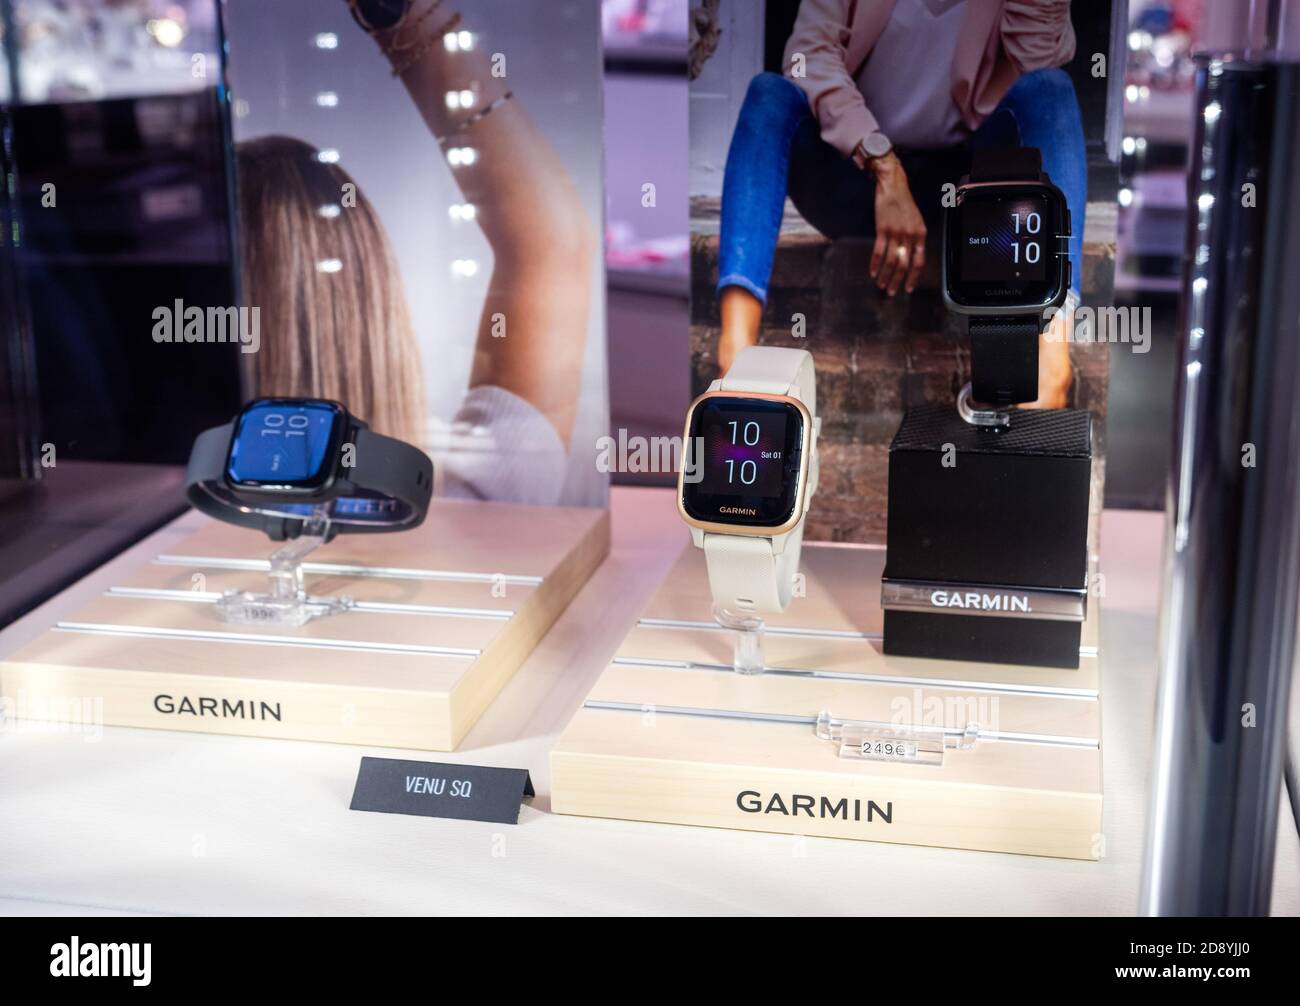 Garmin High Resolution Stock Photography and Images - Alamy